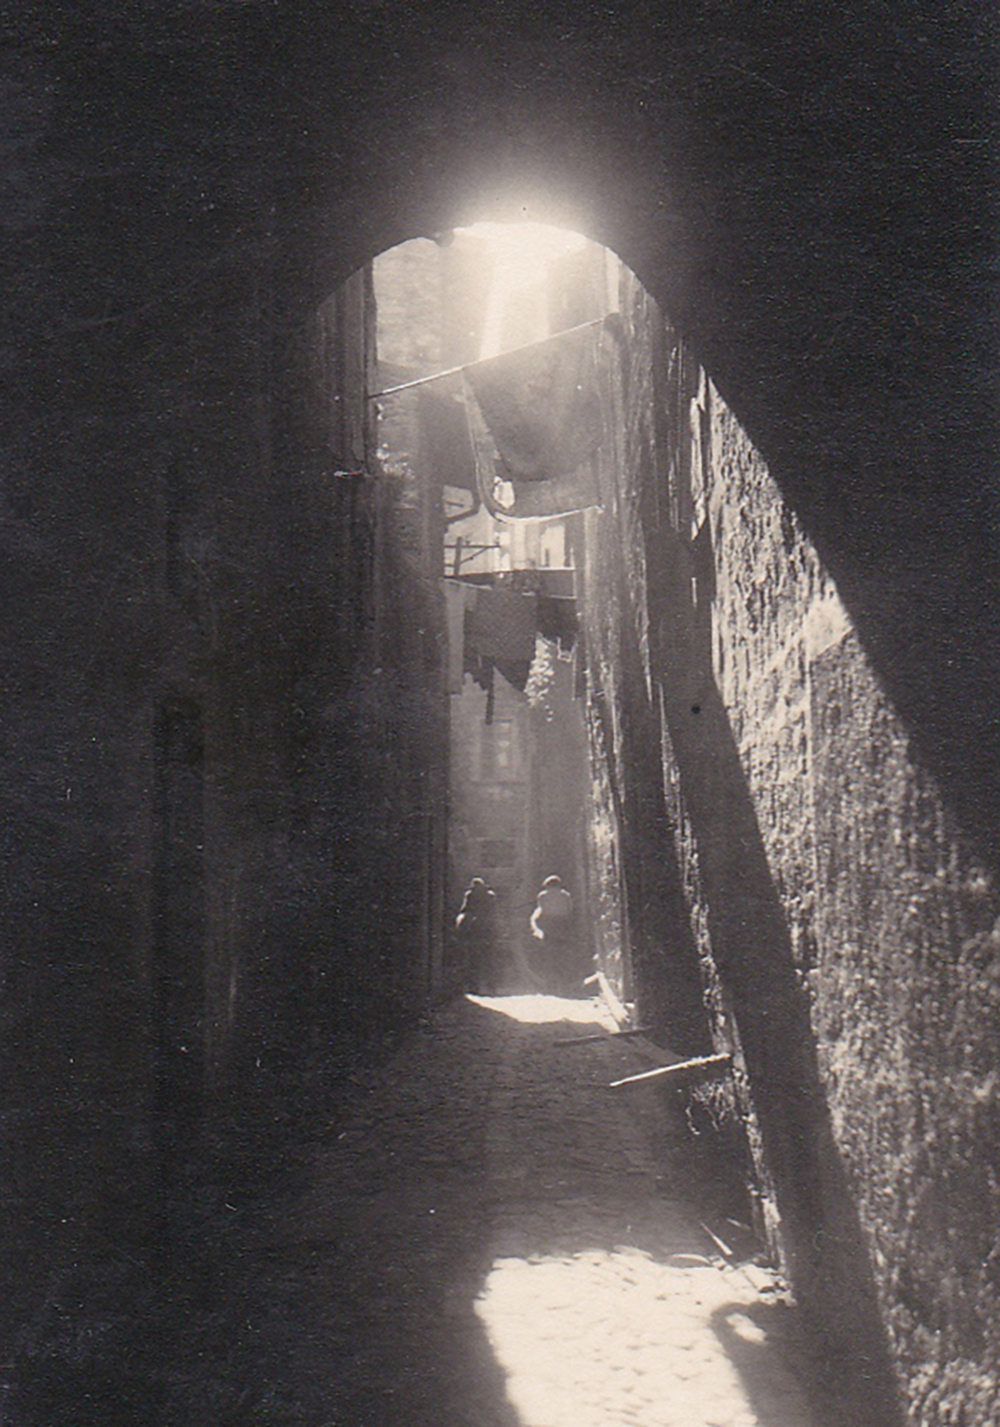 Play of light and shadows in the “Rua” (alleyway)